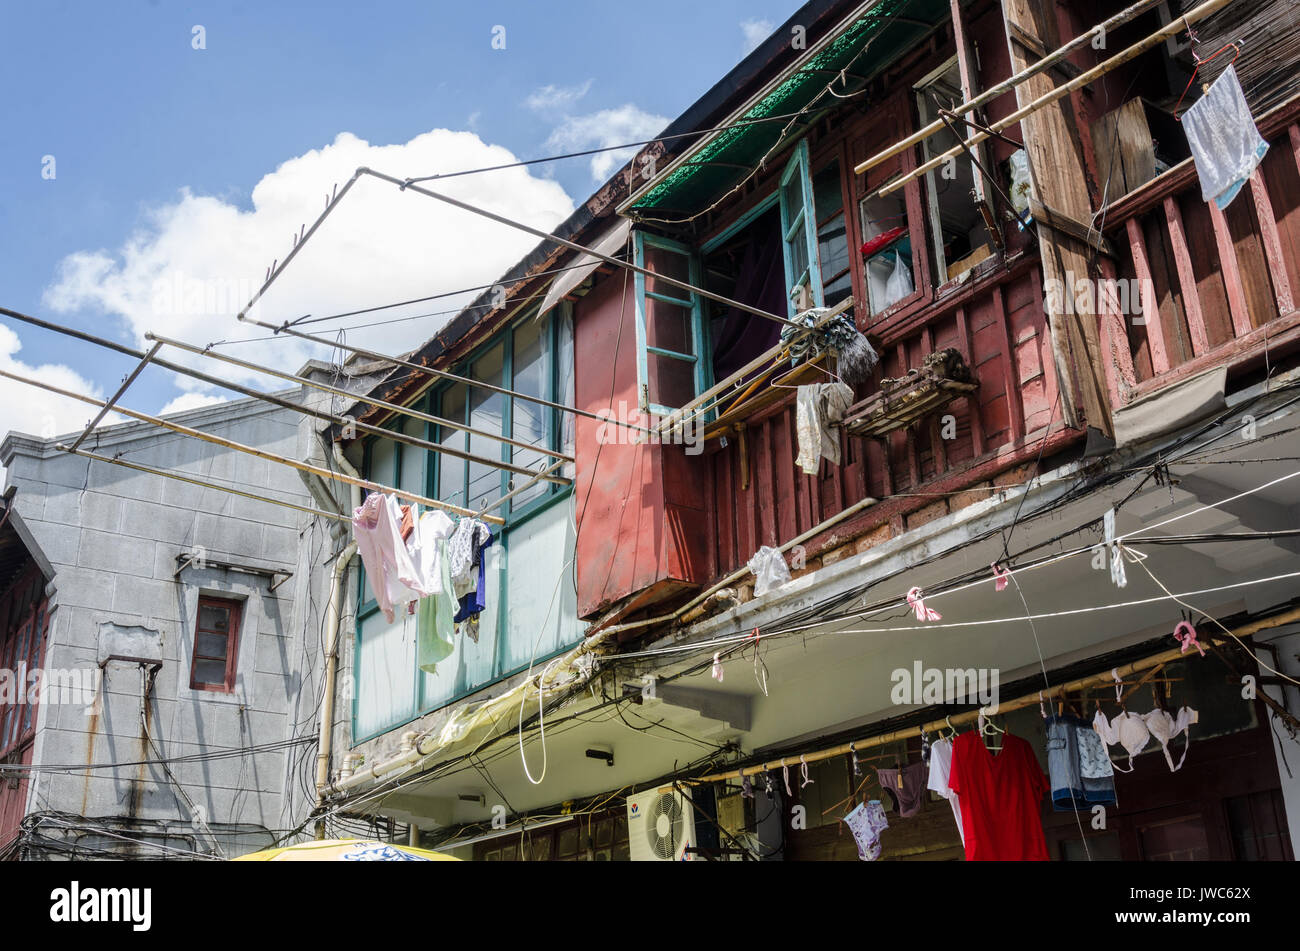 Clothes drying racks overhang the street from first floor windows down a  street in Shanghai, China Stock Photo - Alamy